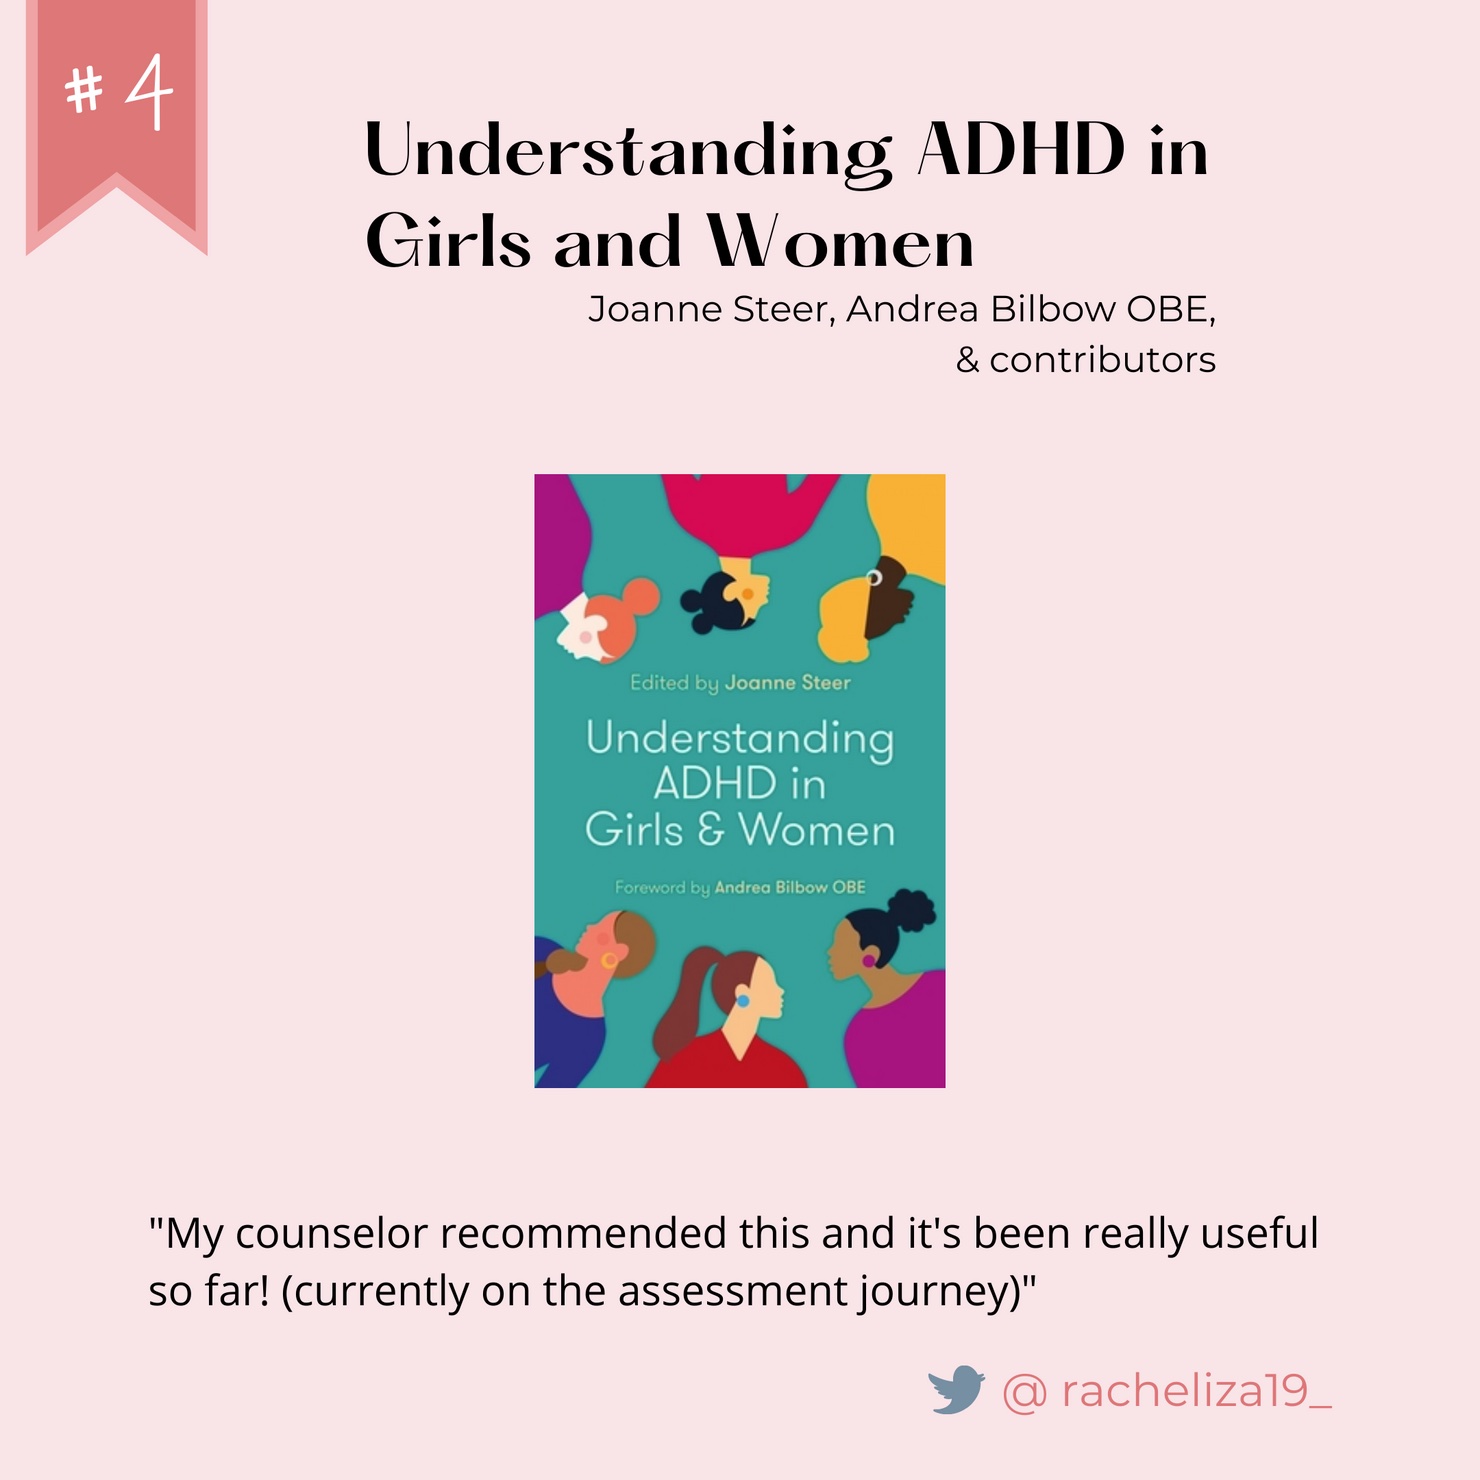 Number 4: Understanding ADHD in Girls and Women. Written by Joanne Steer, Andrea Bilbow OBE, and contributors. Quote form @racheliza19_ on Twitter: "My counselor recommended this and it's been really useful so far! (currently on the assessment journey).